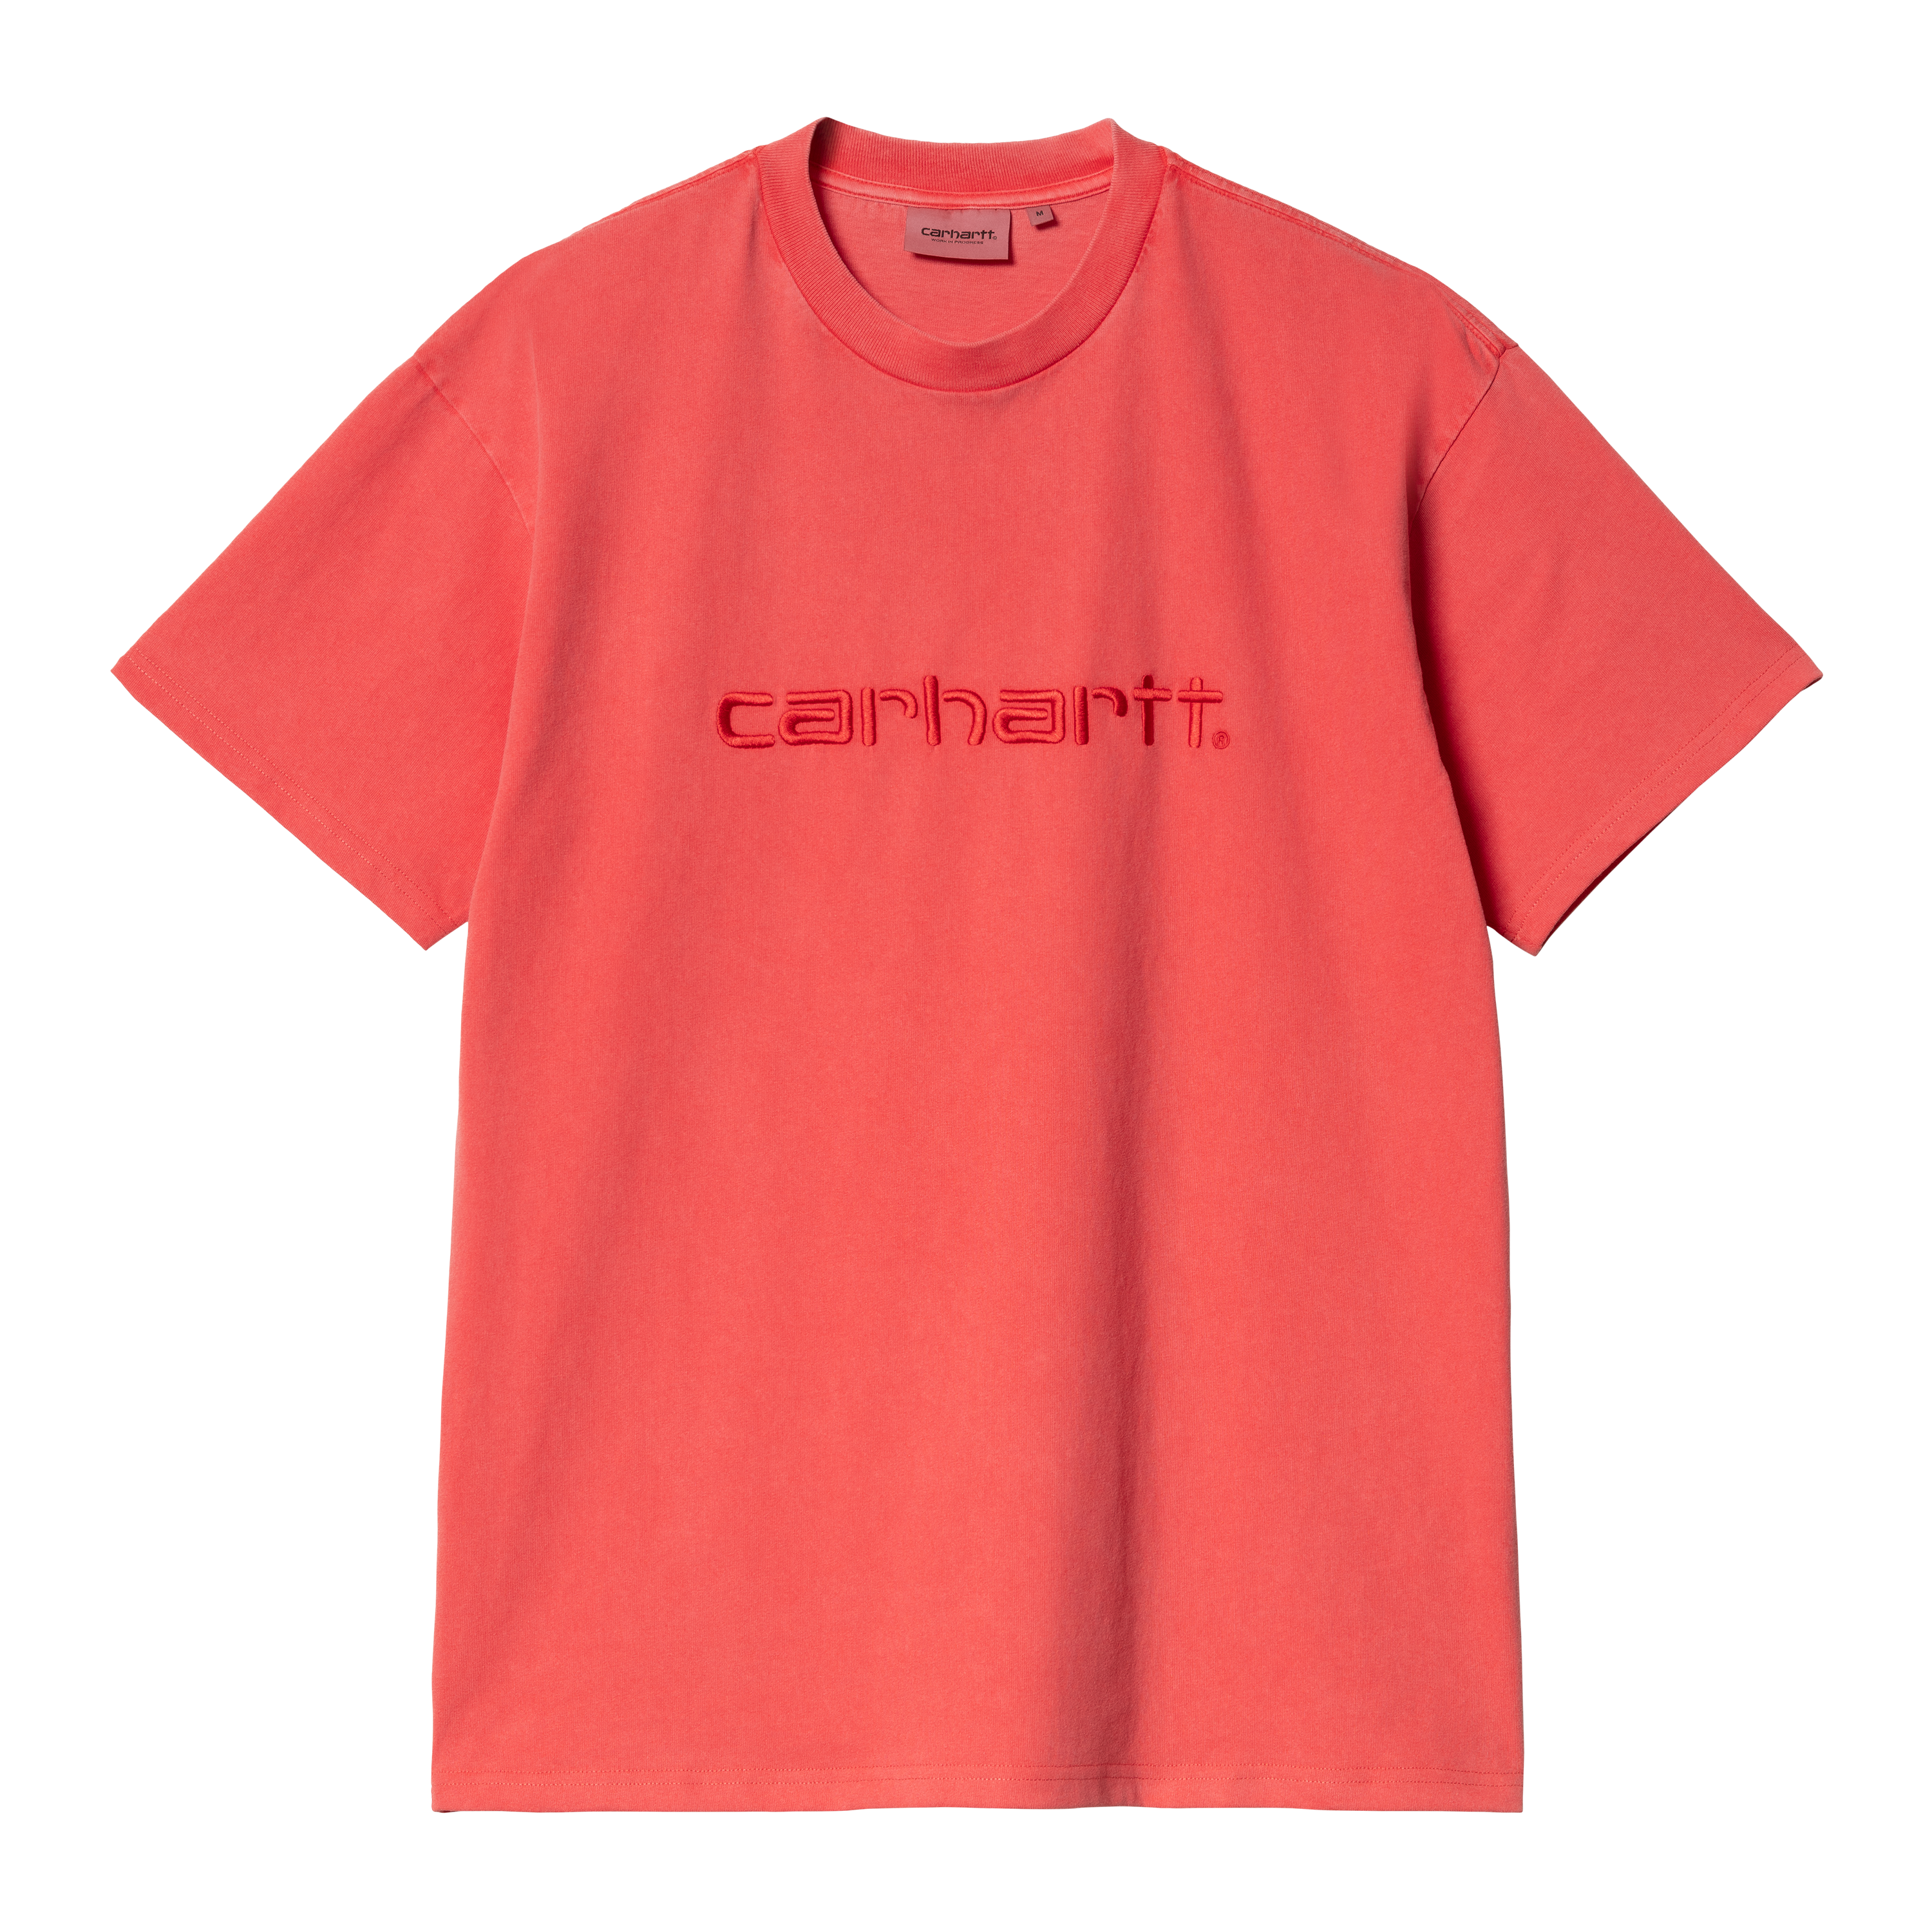 Carhartt WIP Short Sleeve Duster T-Shirt in Red